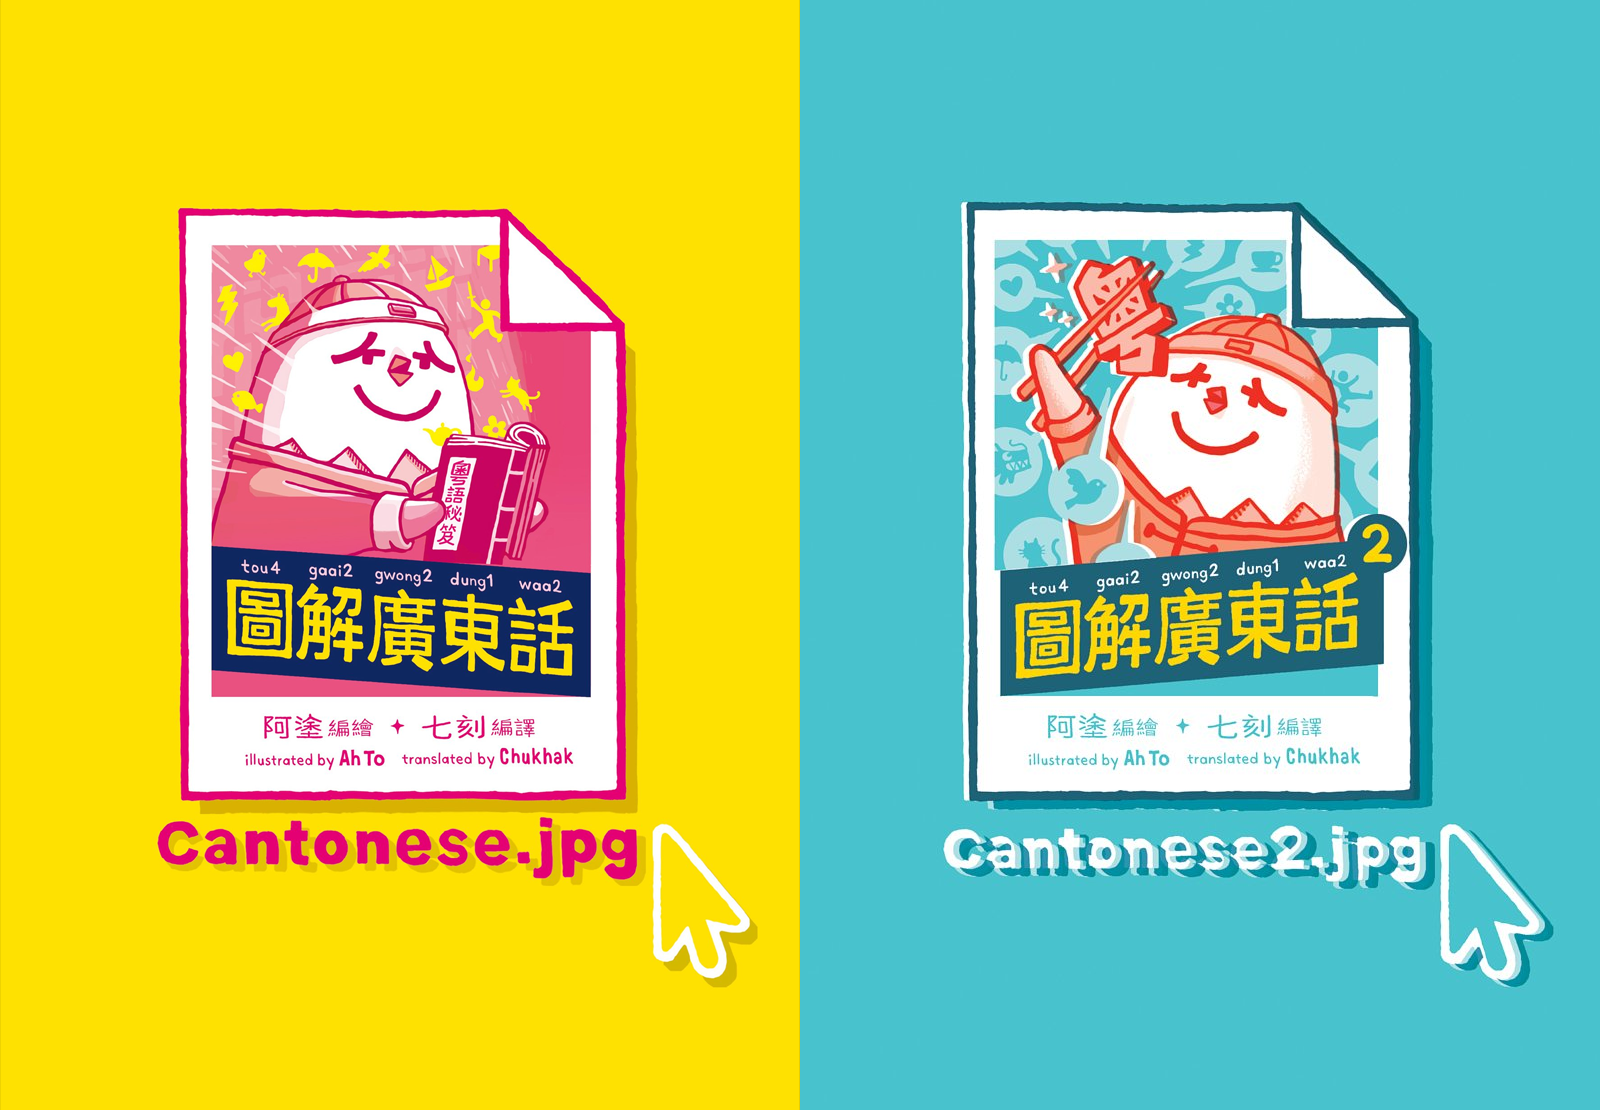 Two covers for the Cantonese.jpg books, featuring a cartoon chicken reading and eating Cantonese text respectively over a bright yellow and blue background